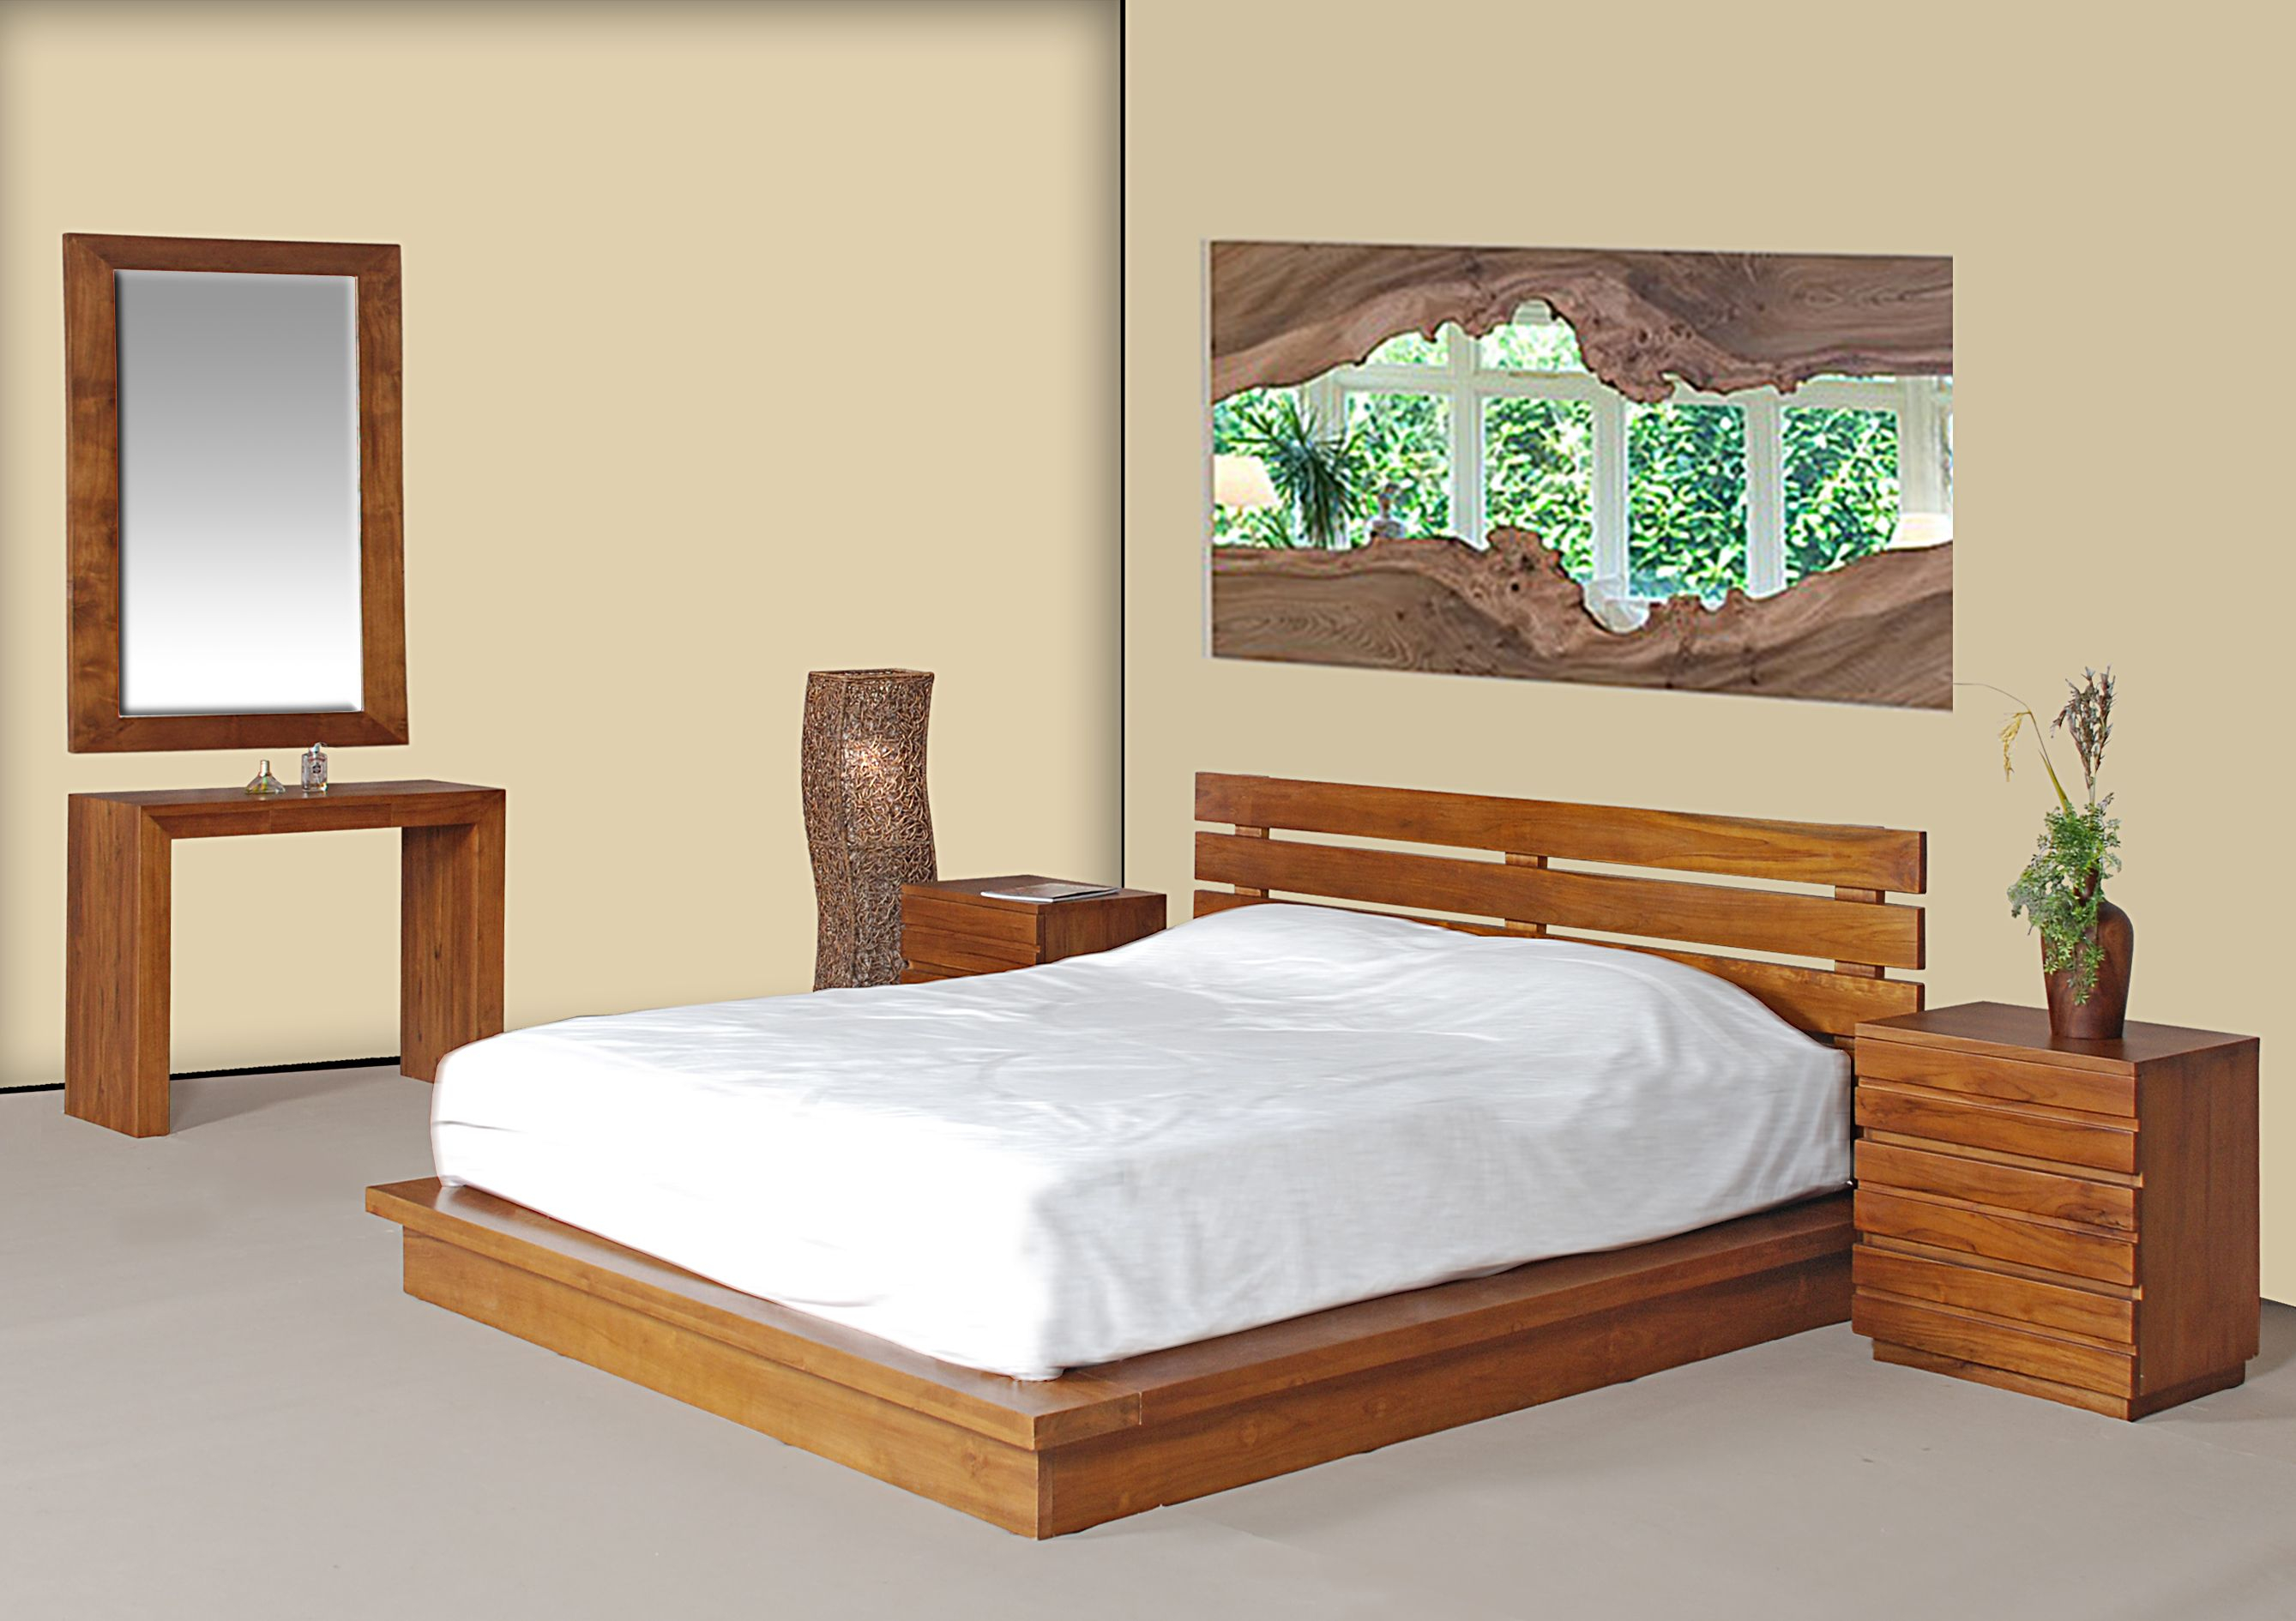 Teak Furniture Distributor: Bringing Traditional And Modern Designs To Your Home